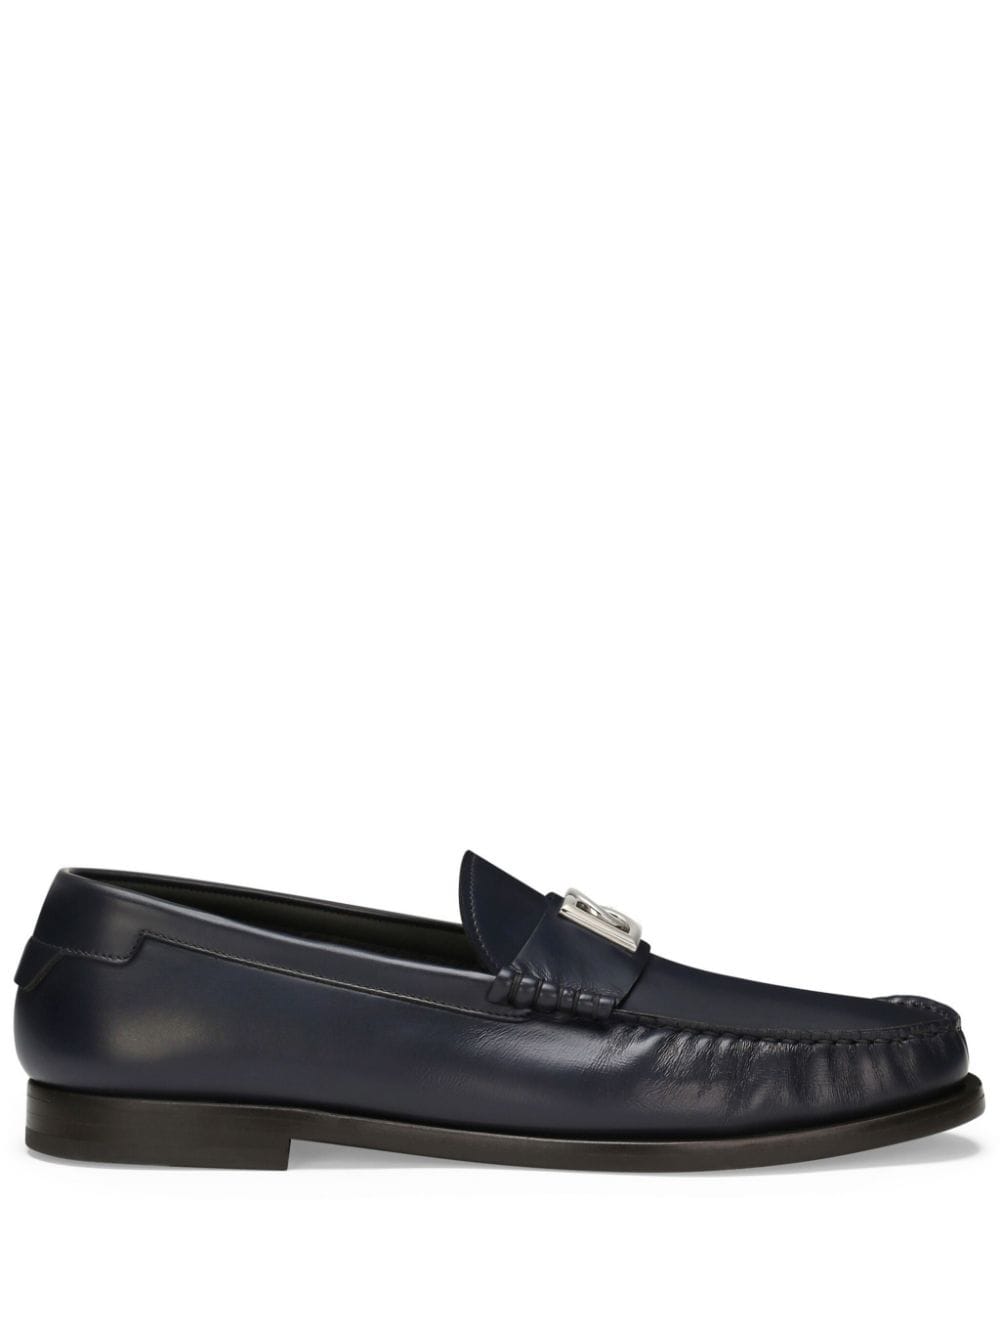 DOLCE & GABBANA Luxurious Navy Blue Leather Loafers with Logo Plaque Detail for Men